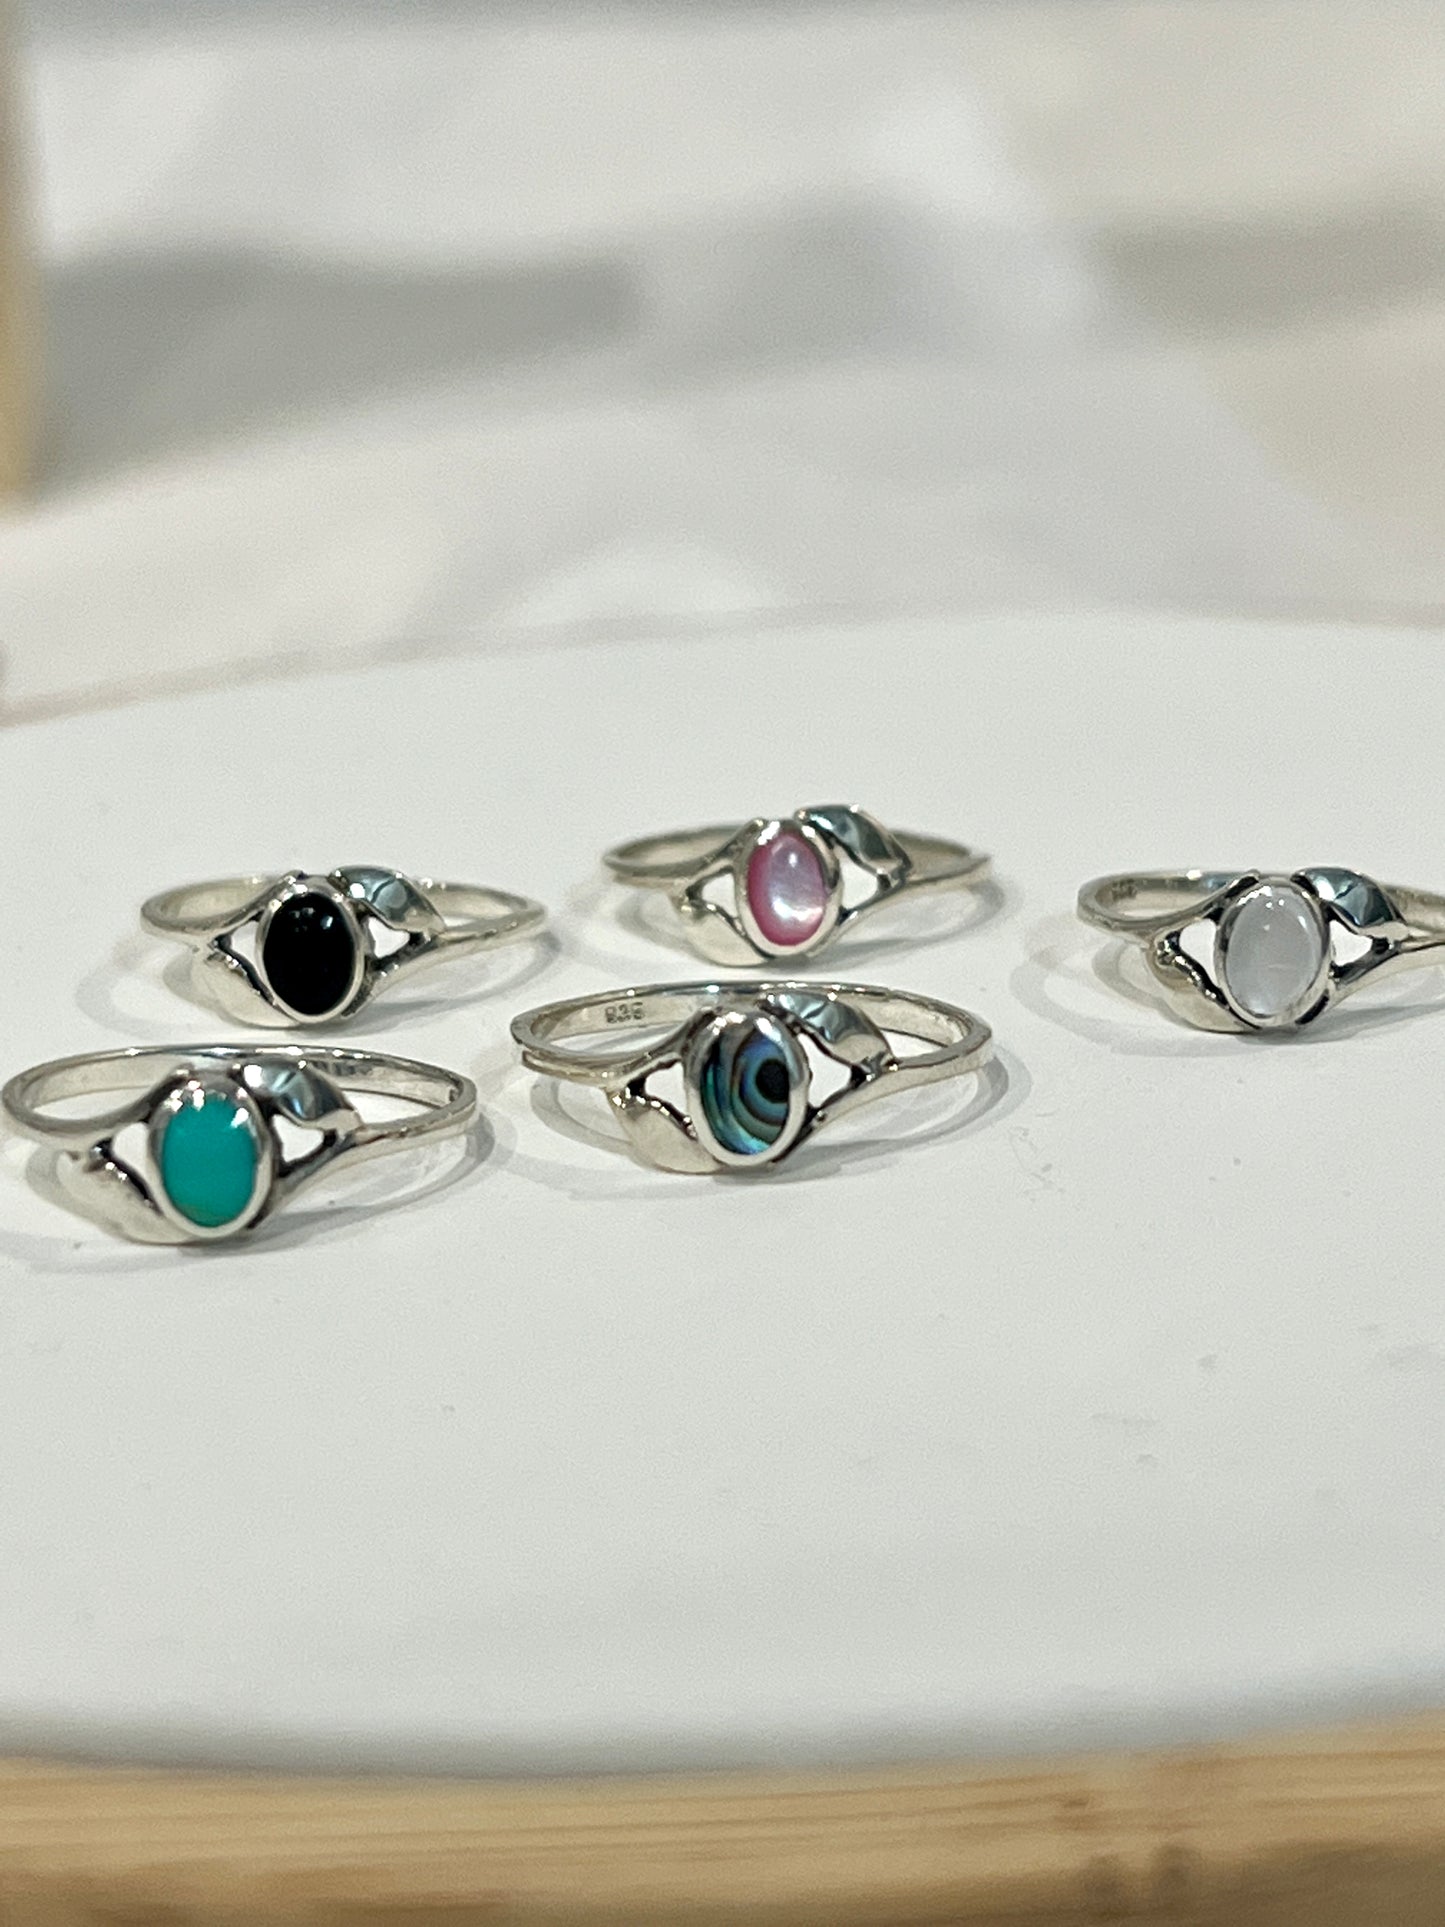 A set of Super Silver Dainty Oval Stone Rings with Leaf Accents, including mother of pearl, on top of a plate.